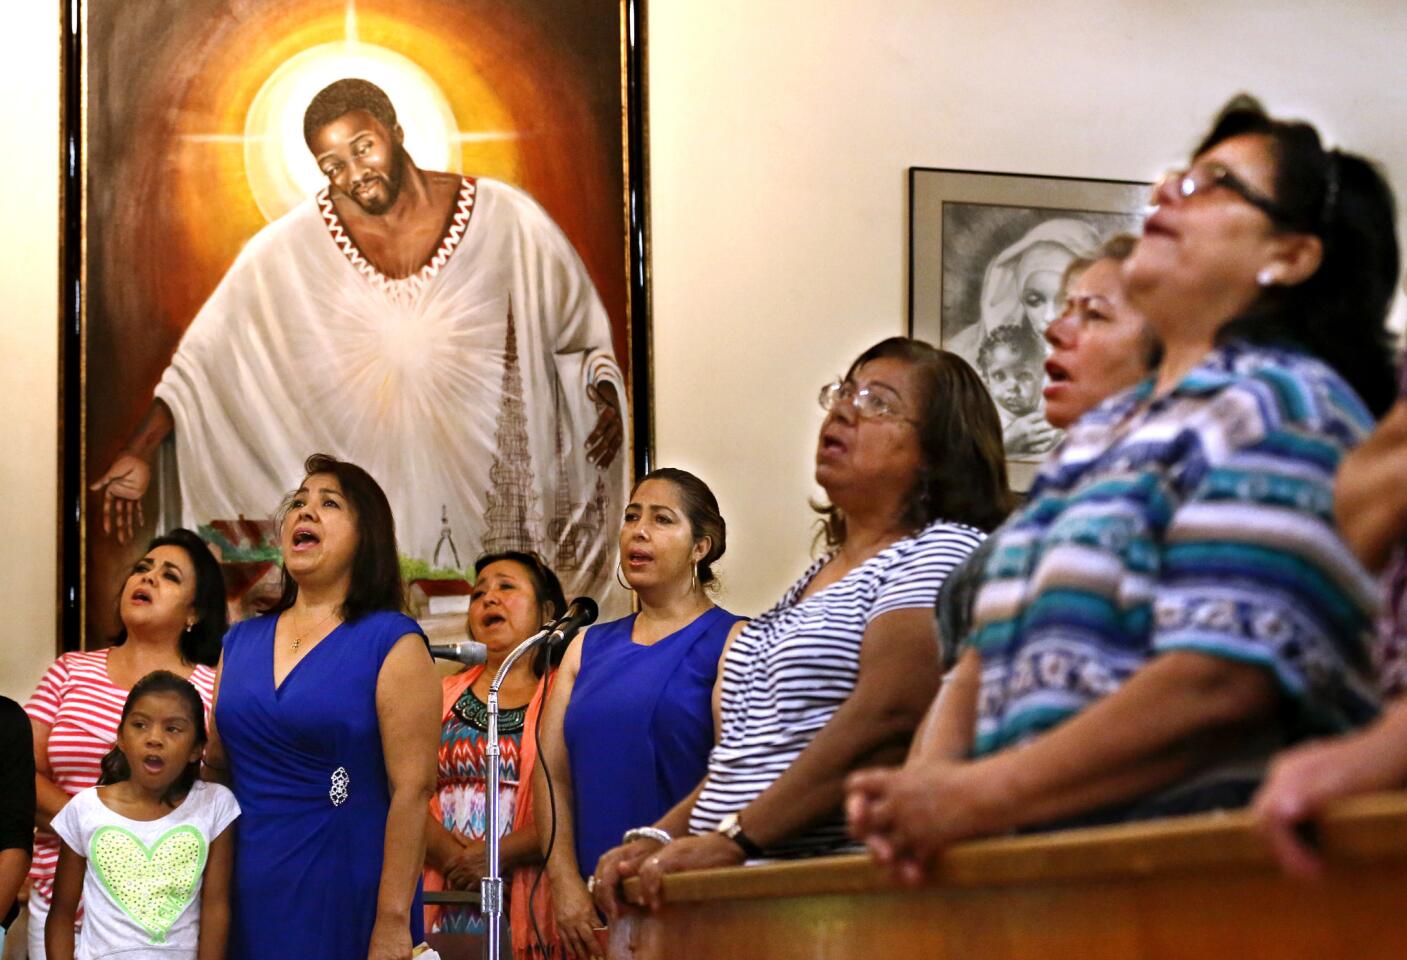 Members of St. Lawrence Brindisi Church on Compton Avenue in Watts sing during Sunday morning Mass on July 26, 2015. In the background is a painting known as "Jesus of Watts" that was donated to the church some 20 years ago.